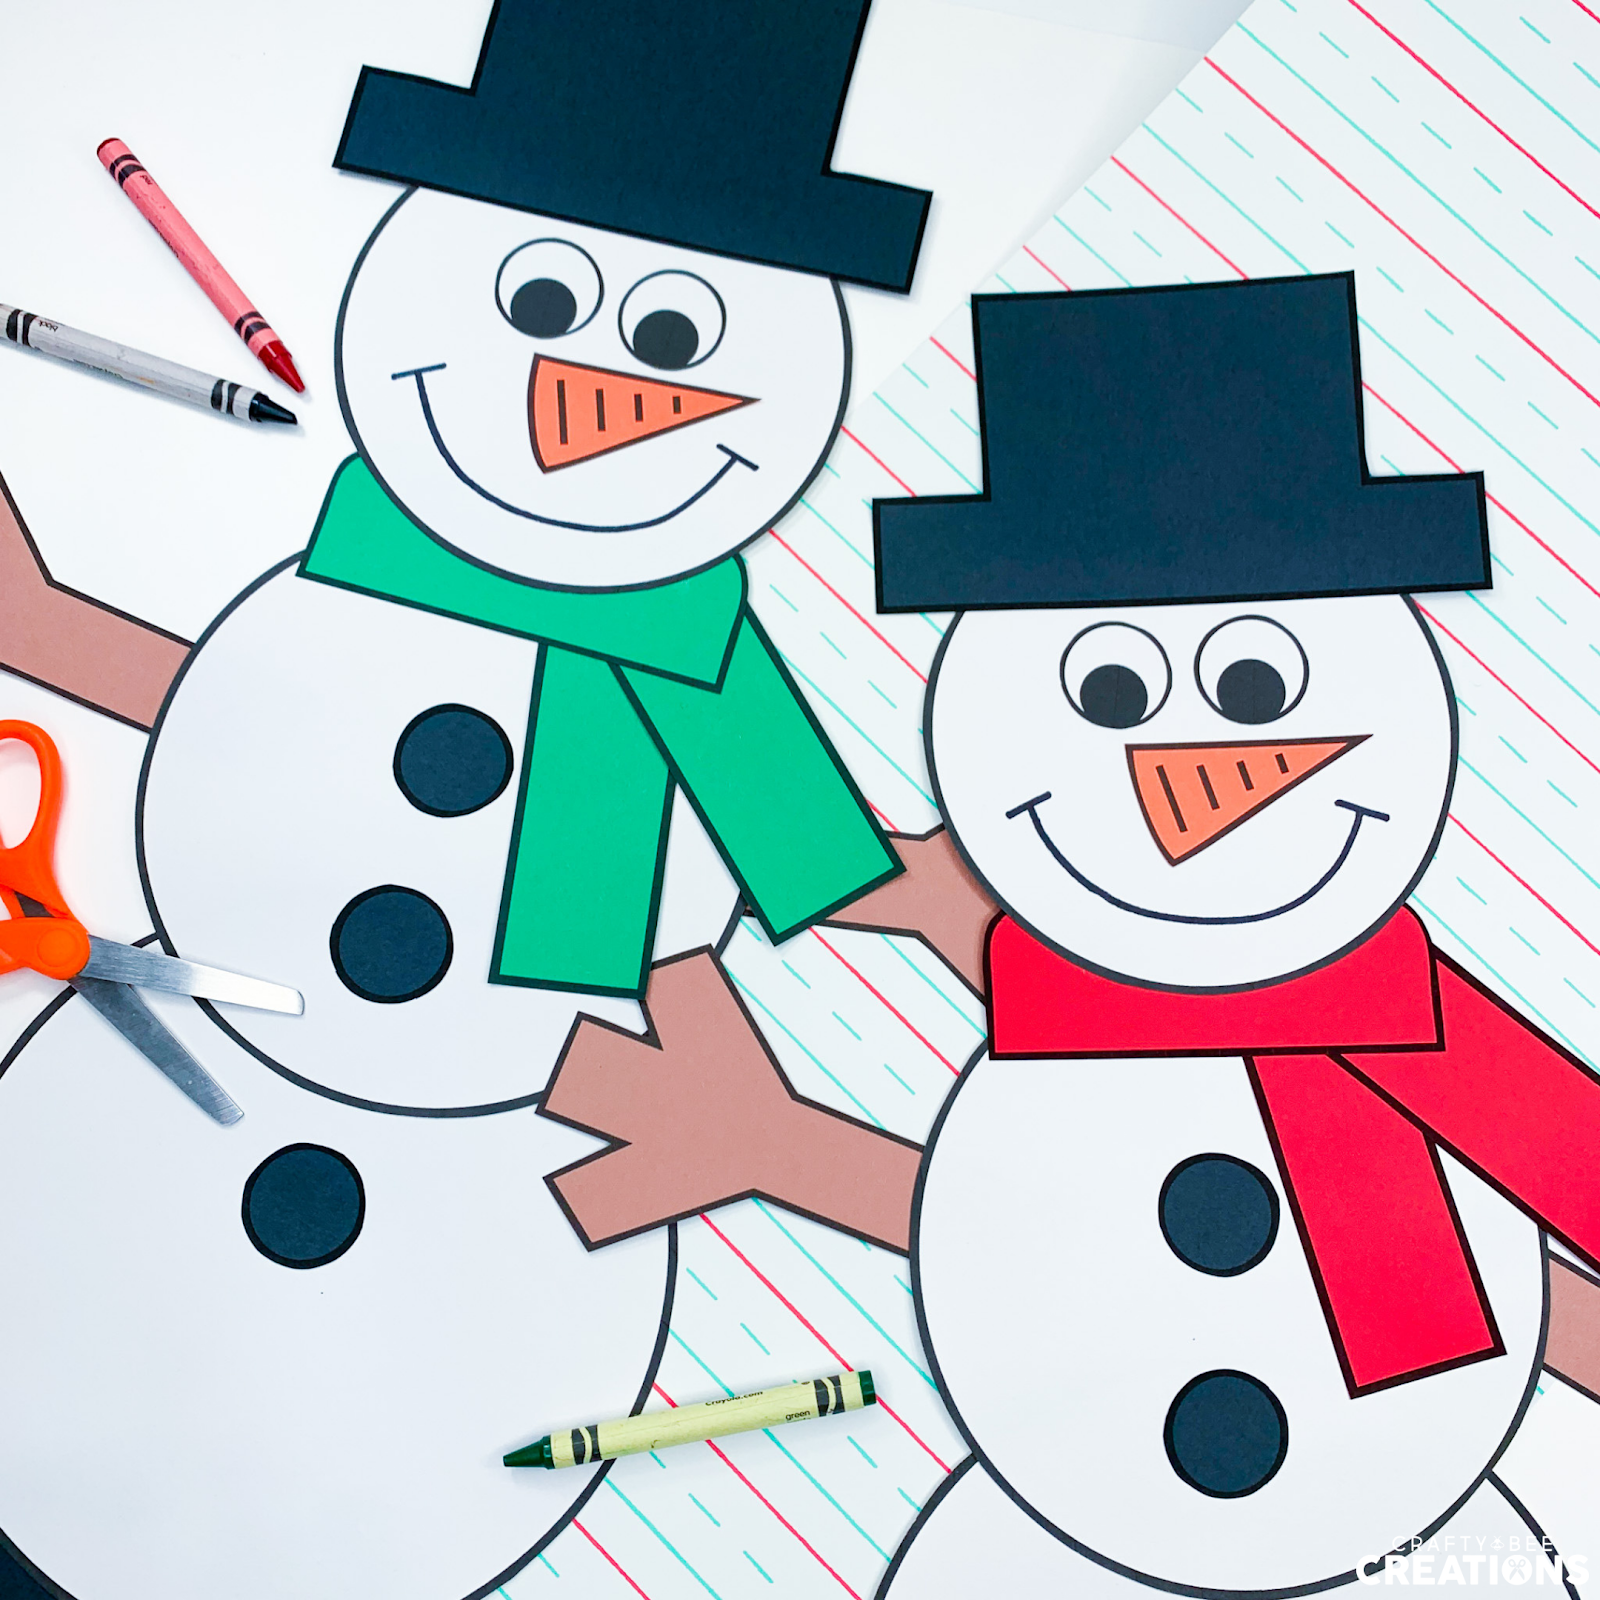 In this image there are two snowmen. One has a green scarf and the other has a red scarf. There is an orange pair of scissors as well as some multi-colored crayons laying on the table.